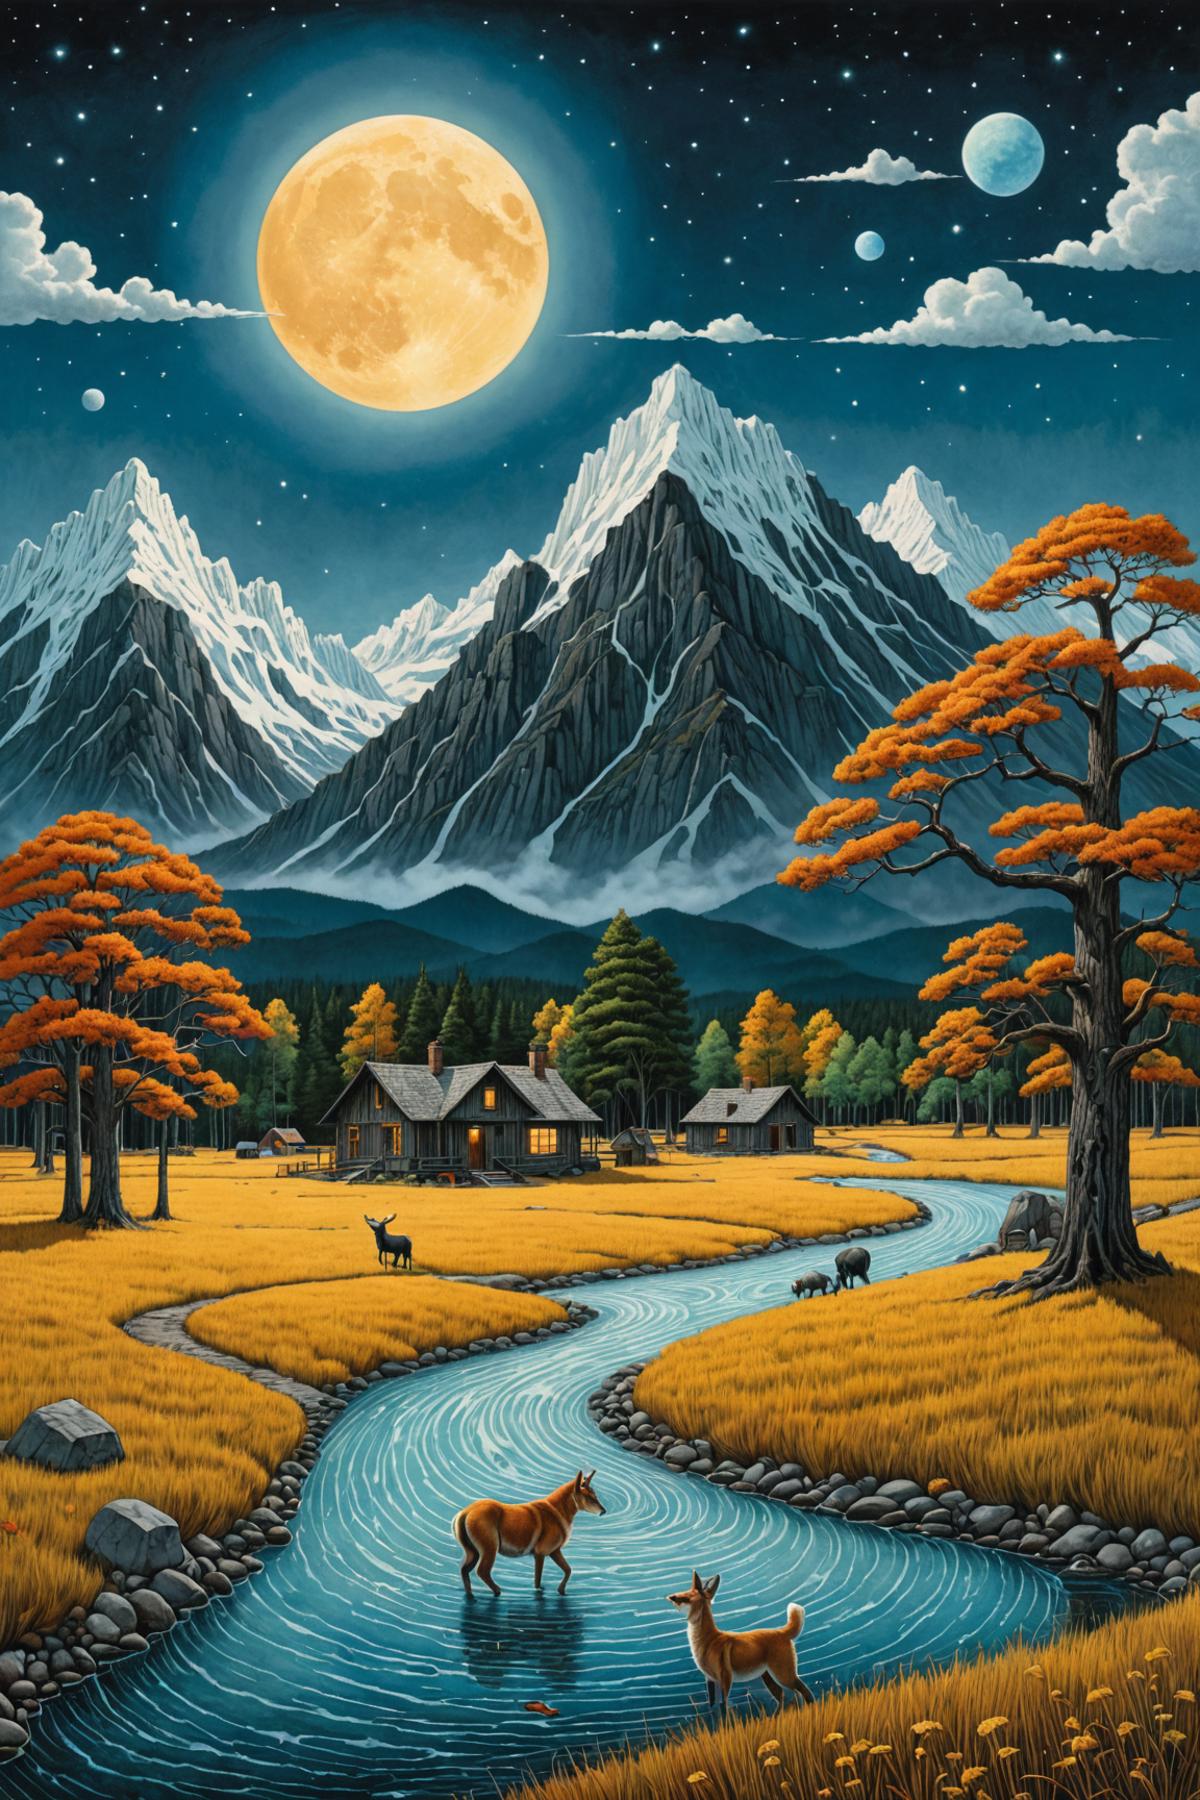 A painting of a mountain valley with a house and animals.